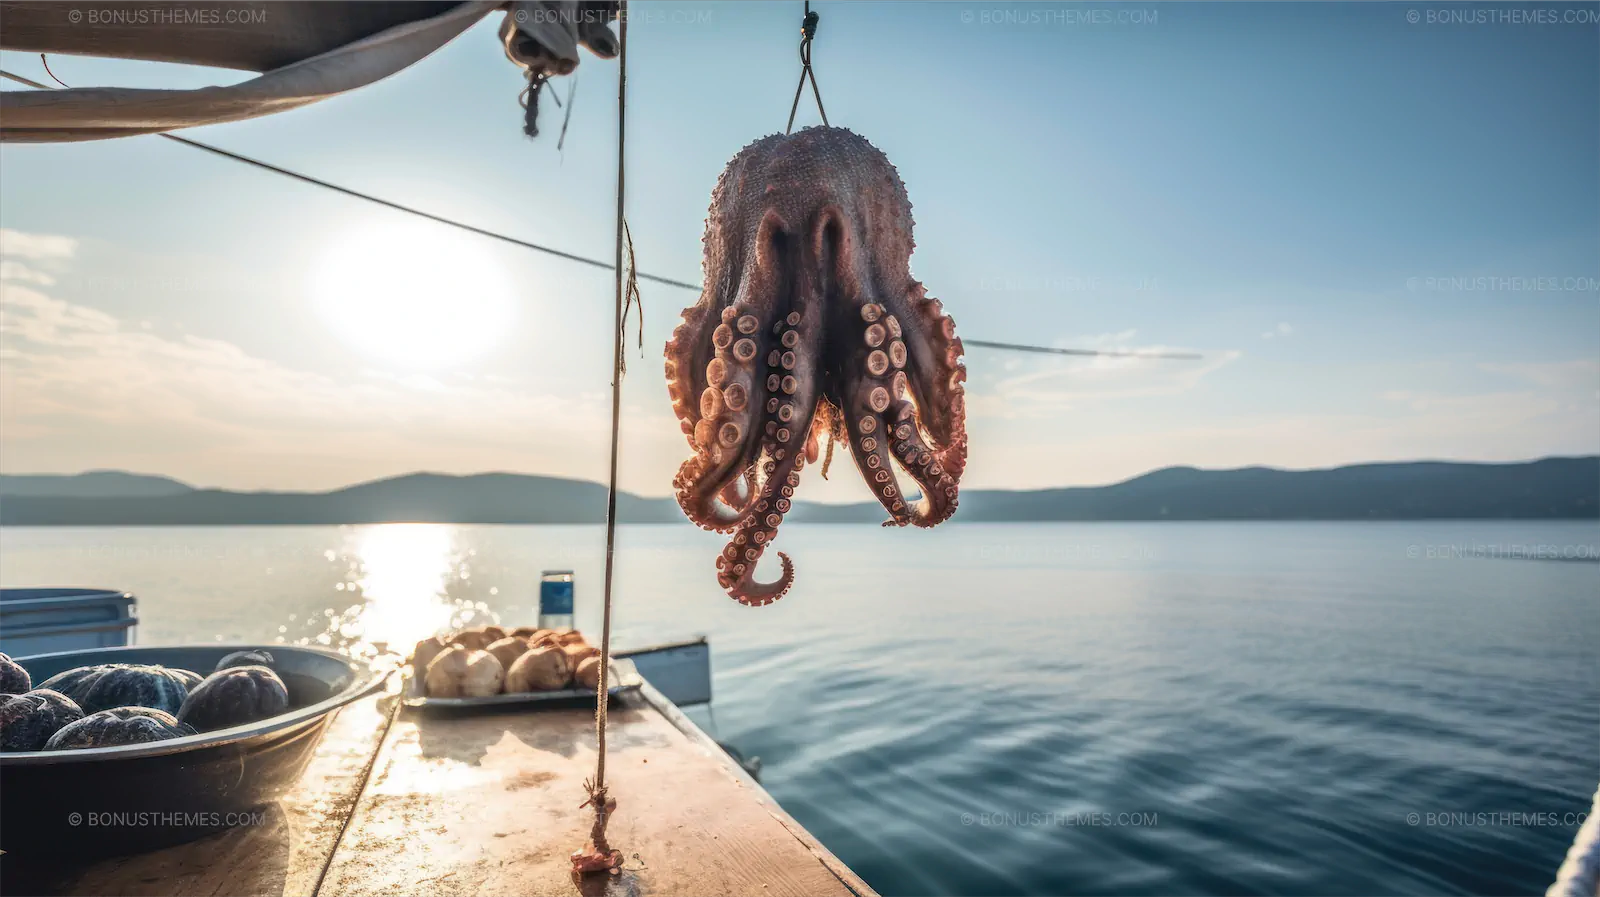 An octopus freshly caught from the Aegean Sea is hanging by a rope